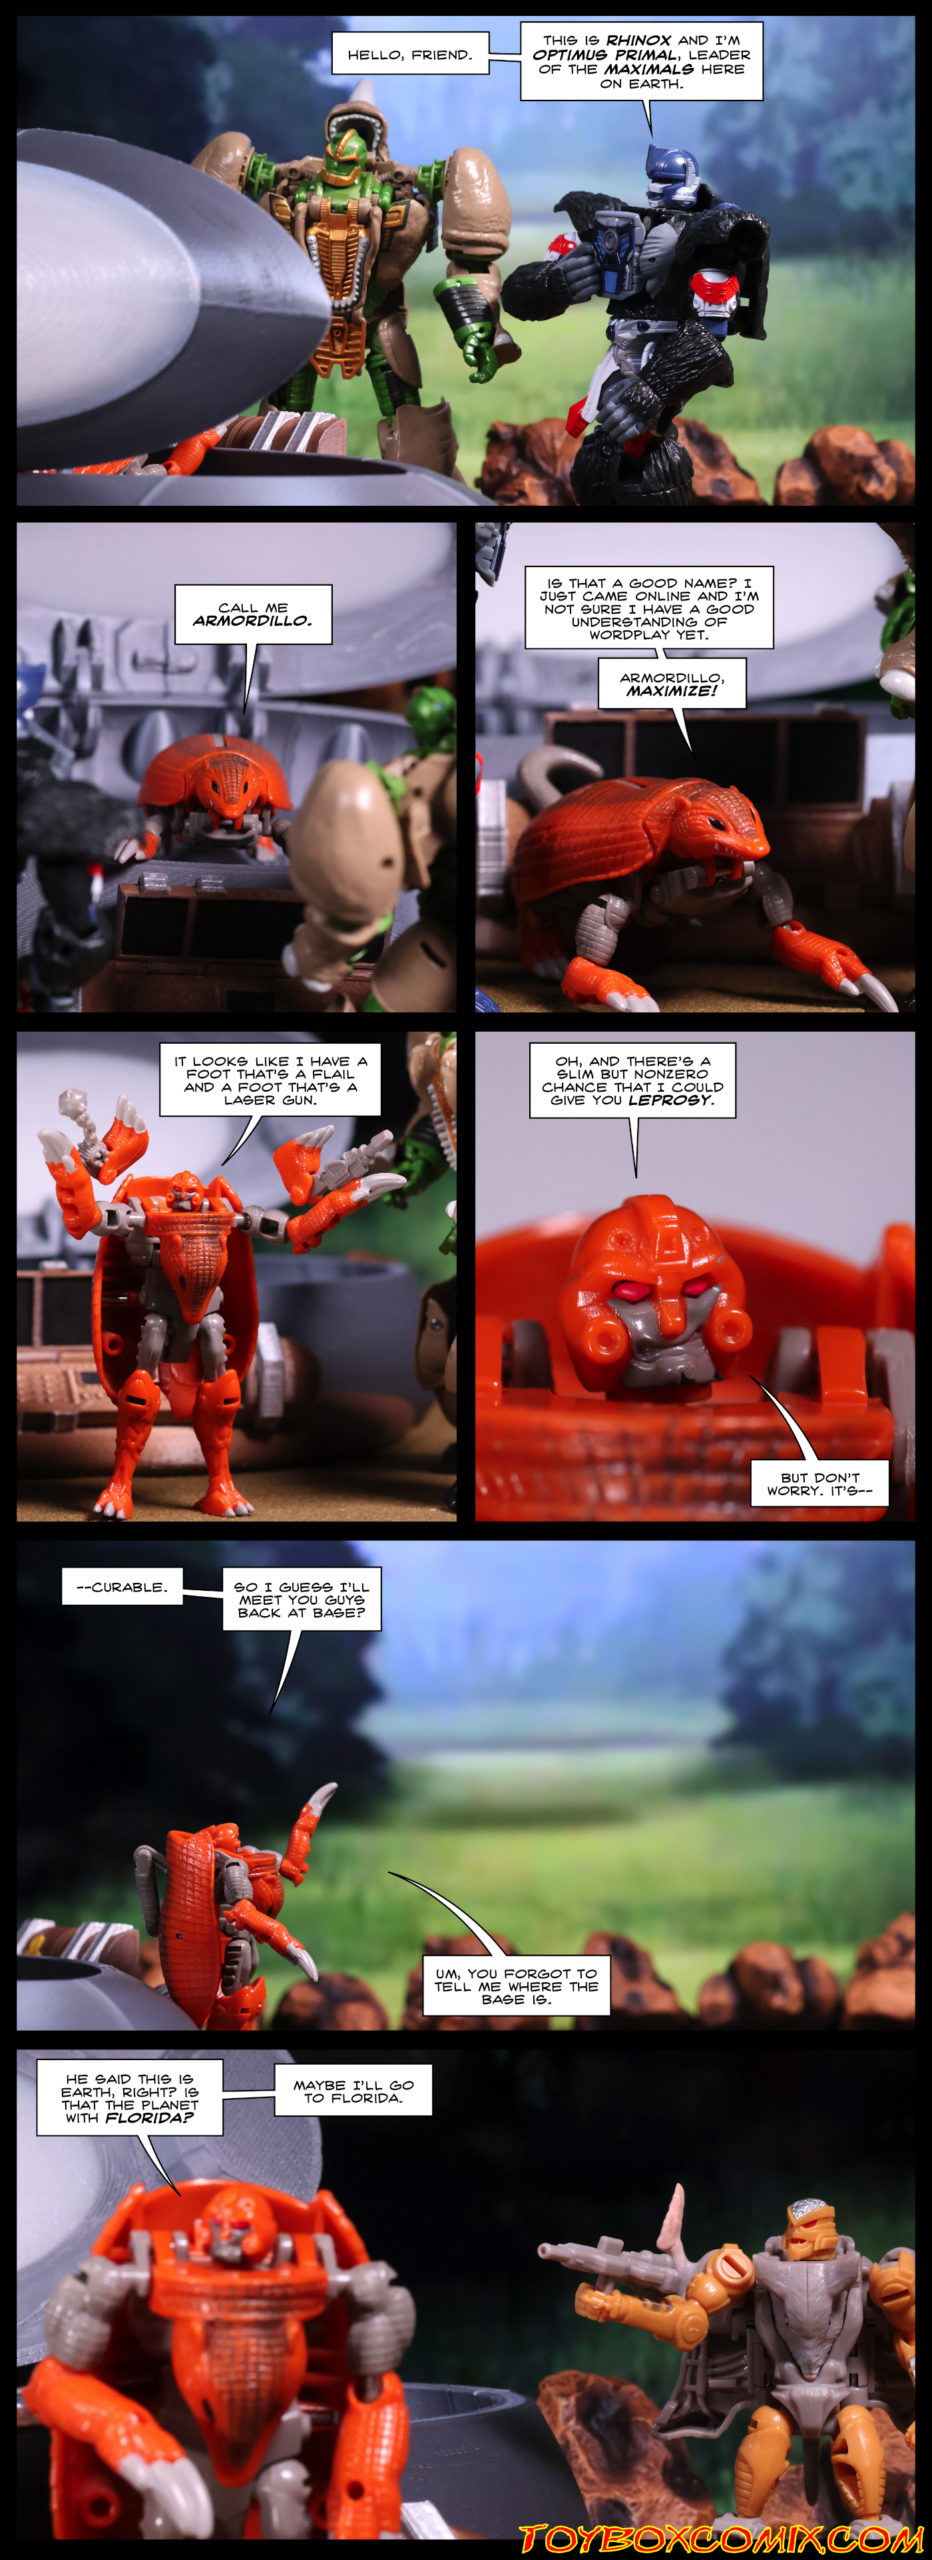 First panel: Optimus Primal and Rhinox look down at an open stasis pod. Optimus: “Hello, friend. This is Rhinox and I’m Optimus Primal, leader of the Maximals here on Earth.” Second panel: Armordillo, in beast mode, looking up out of the stasis pod: “Call me Armordillo.” Third panel: Armordillo: “Is that a good name? I just came online and I’m not sure I have a good understanding of wordplay yet. Armordillo, maximize!” Fourth panel: Armordillo in robot mode: “It looks like I have a foot that’s a flail and a foot that’s a laser gun.” Fifth panel: Armordillo: “Oh, and there’s a slim but nonzero chance that I could give you leprosy. But don’t worry. It’s—" Sixth panel: Optimus and Rhinox are nowhere to be seen. Armordillo: “—Curable. So I guess I’ll meet you guys back at base? Um, you forgot to tell me where the base is.” Seventh panel: In the background, Rattrap aims his gun at Armordillo’s back. Armordillo: “He said this is Earth, right? Is that the planet with Florida? Maybe I’ll go to Florida.”